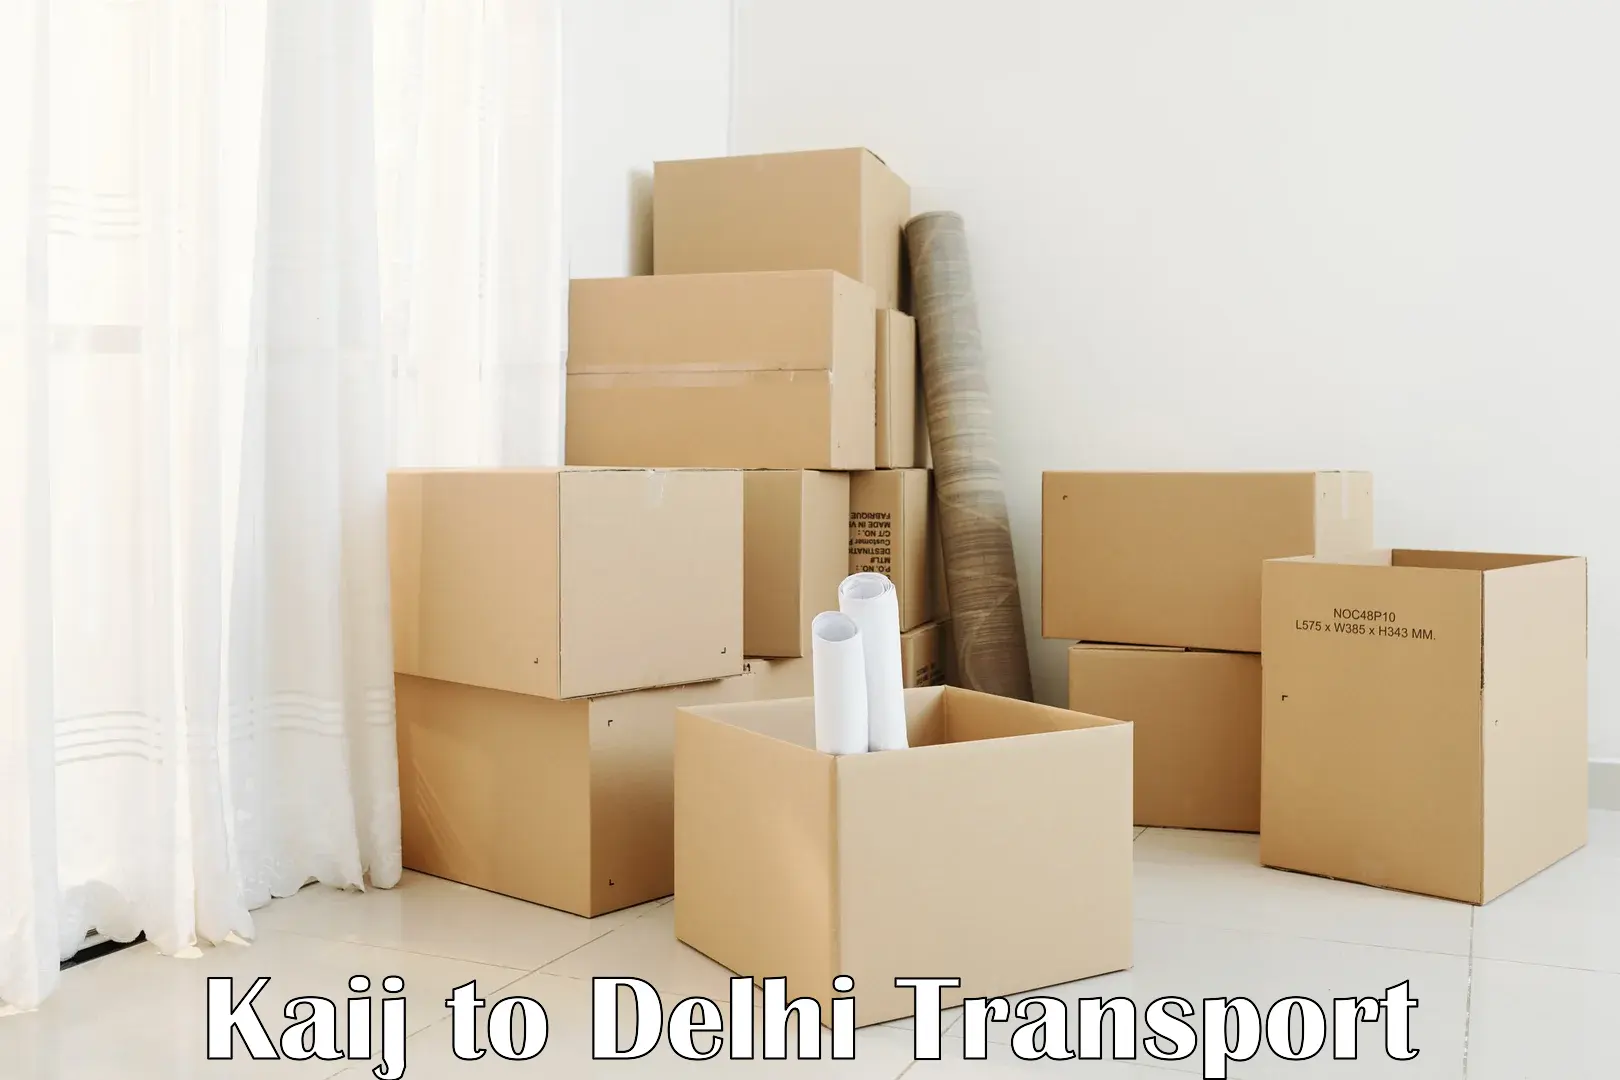 Parcel transport services Kaij to NCR